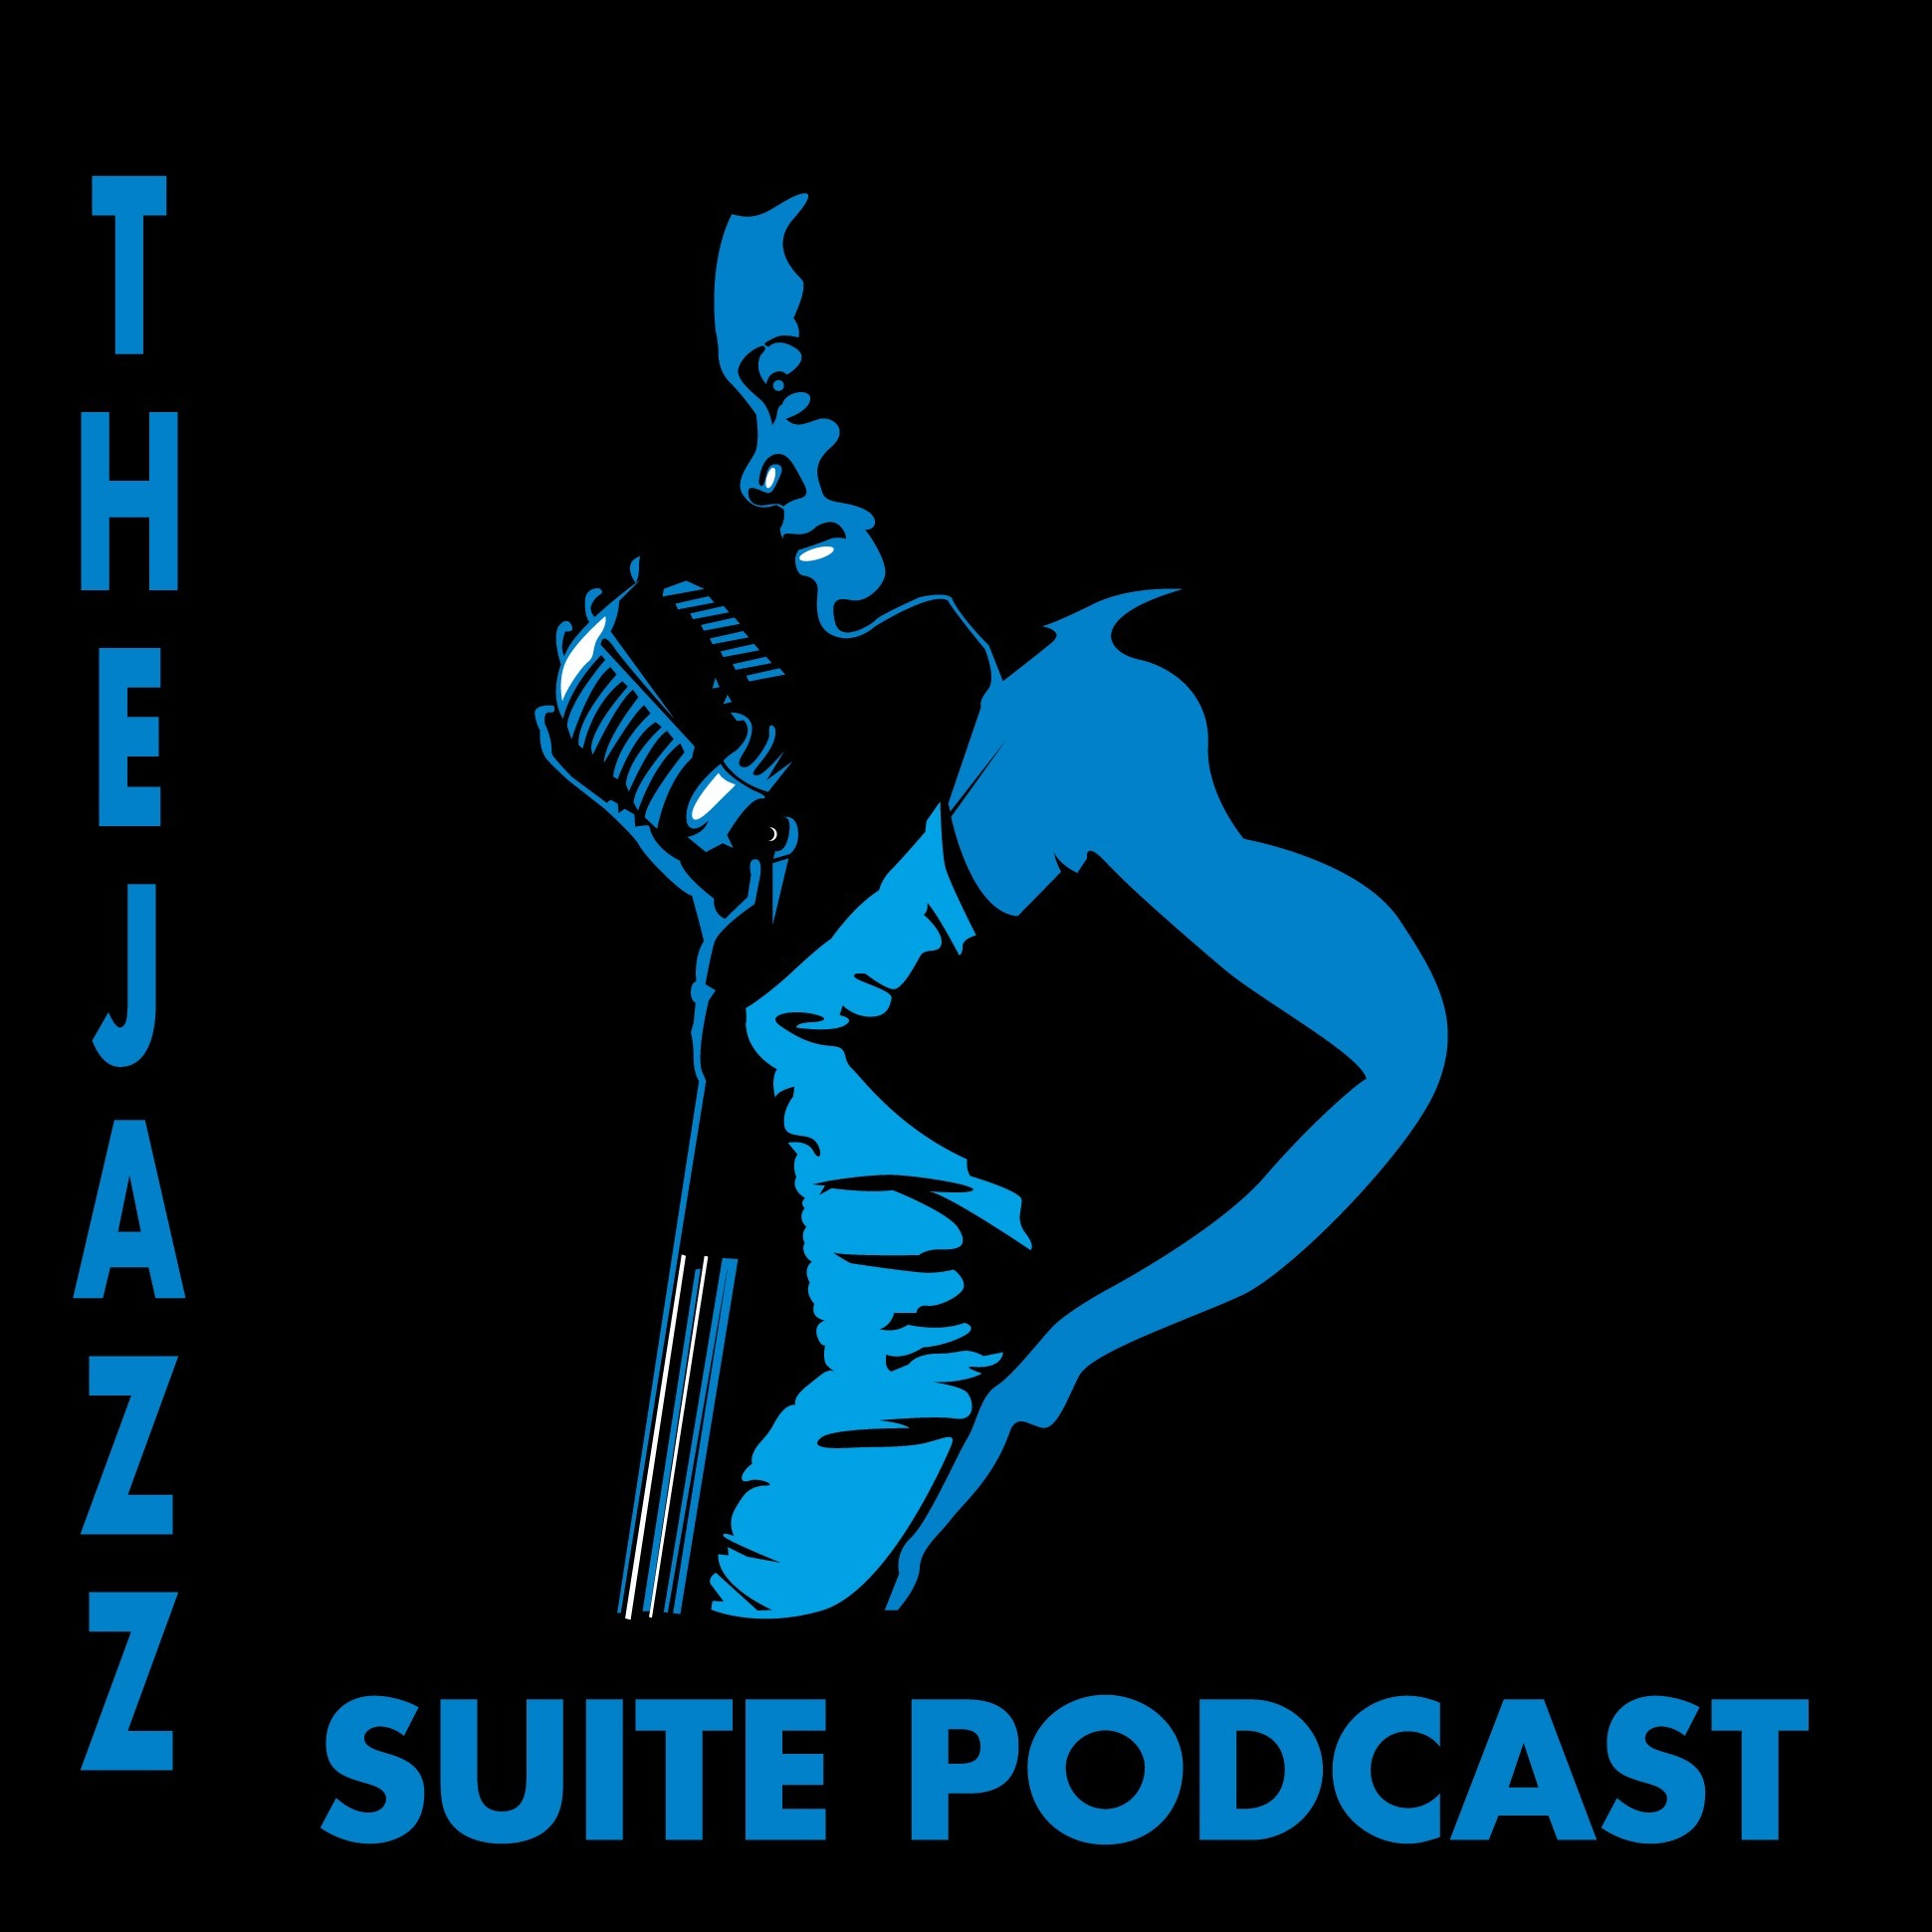 The Jazz Suite Podcast Show #453